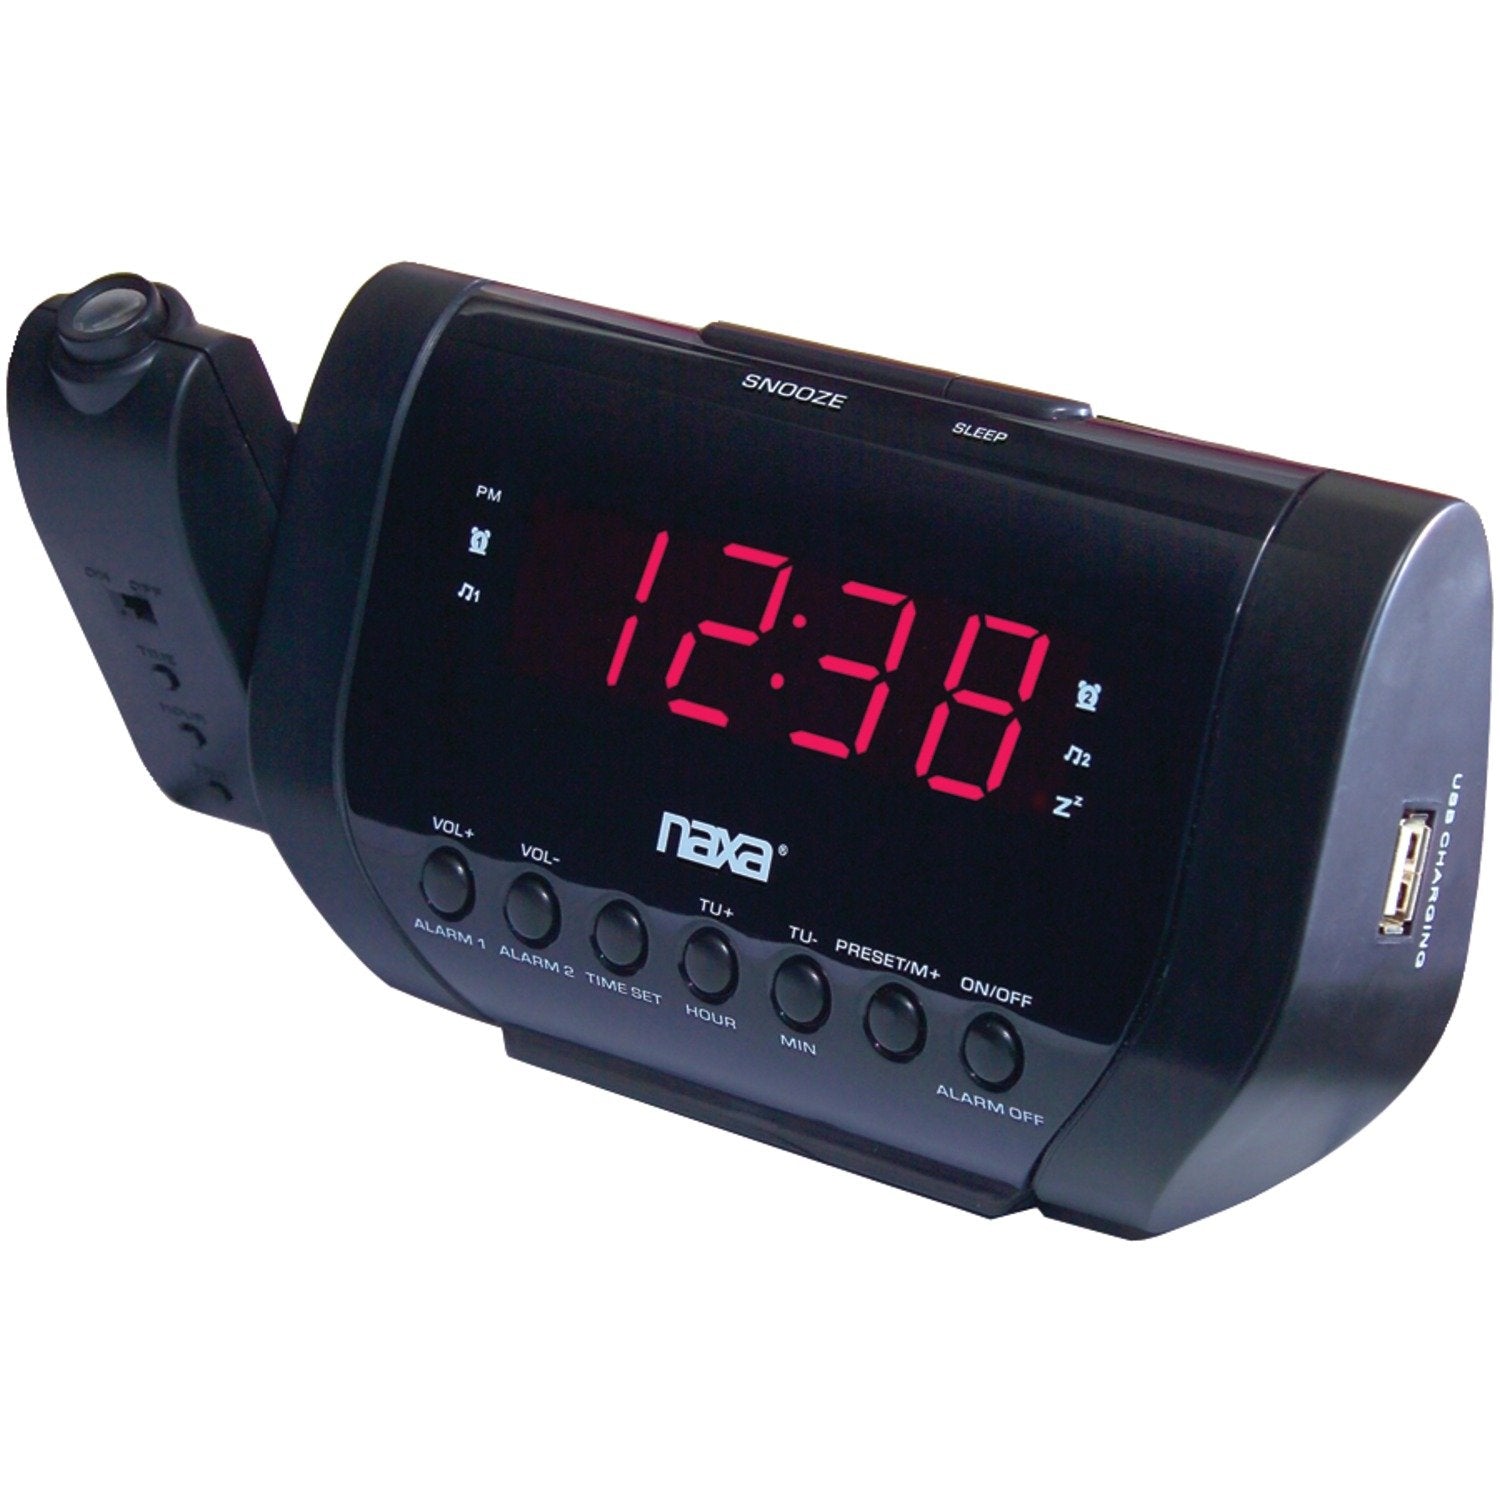 NAXA Electronics NRC-167 Wall-Projection Dual Alarm Clock with Built-in USB Device Charger (Black)  - Very Good